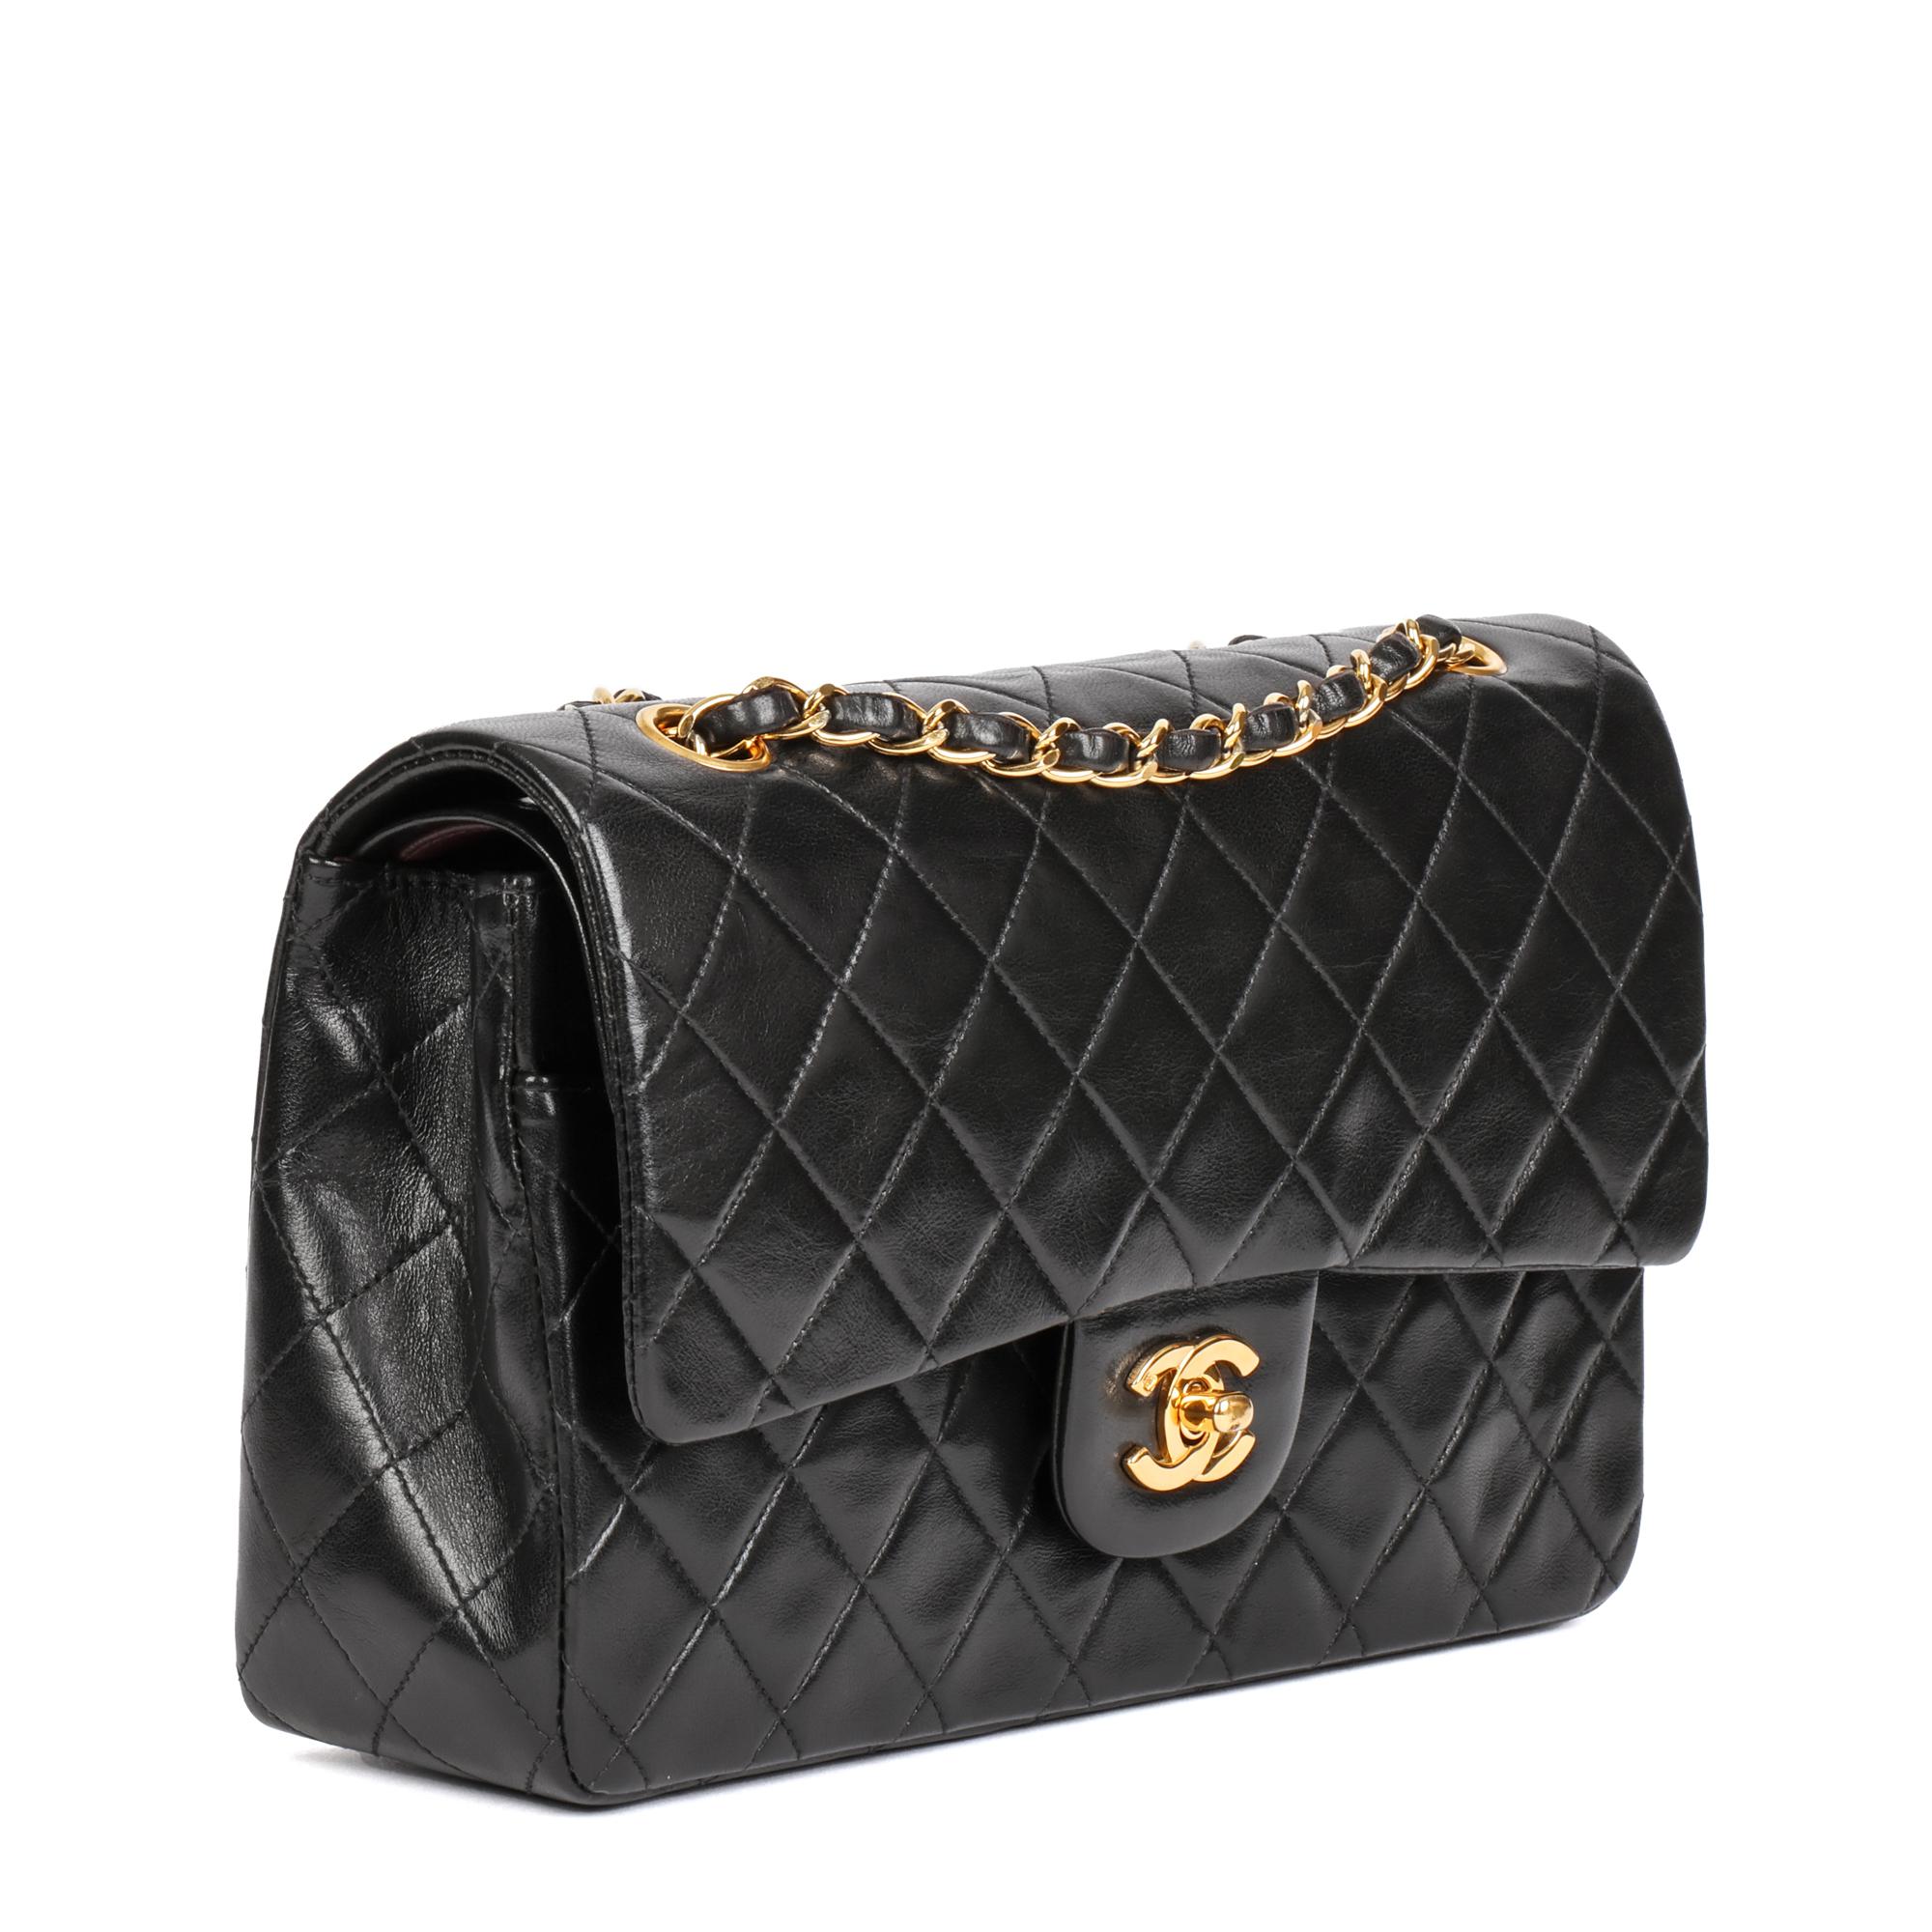 CHANEL
Black Quilted Lambskin Vintage Medium Classic Double Flap Bag 

Serial Number: 4815038
Age (Circa): 1997
Accompanied By: Chanel Dust Bag, Authenticity Card
Authenticity Details: Authenticity Card, Serial Sticker (Made in France)
Gender: